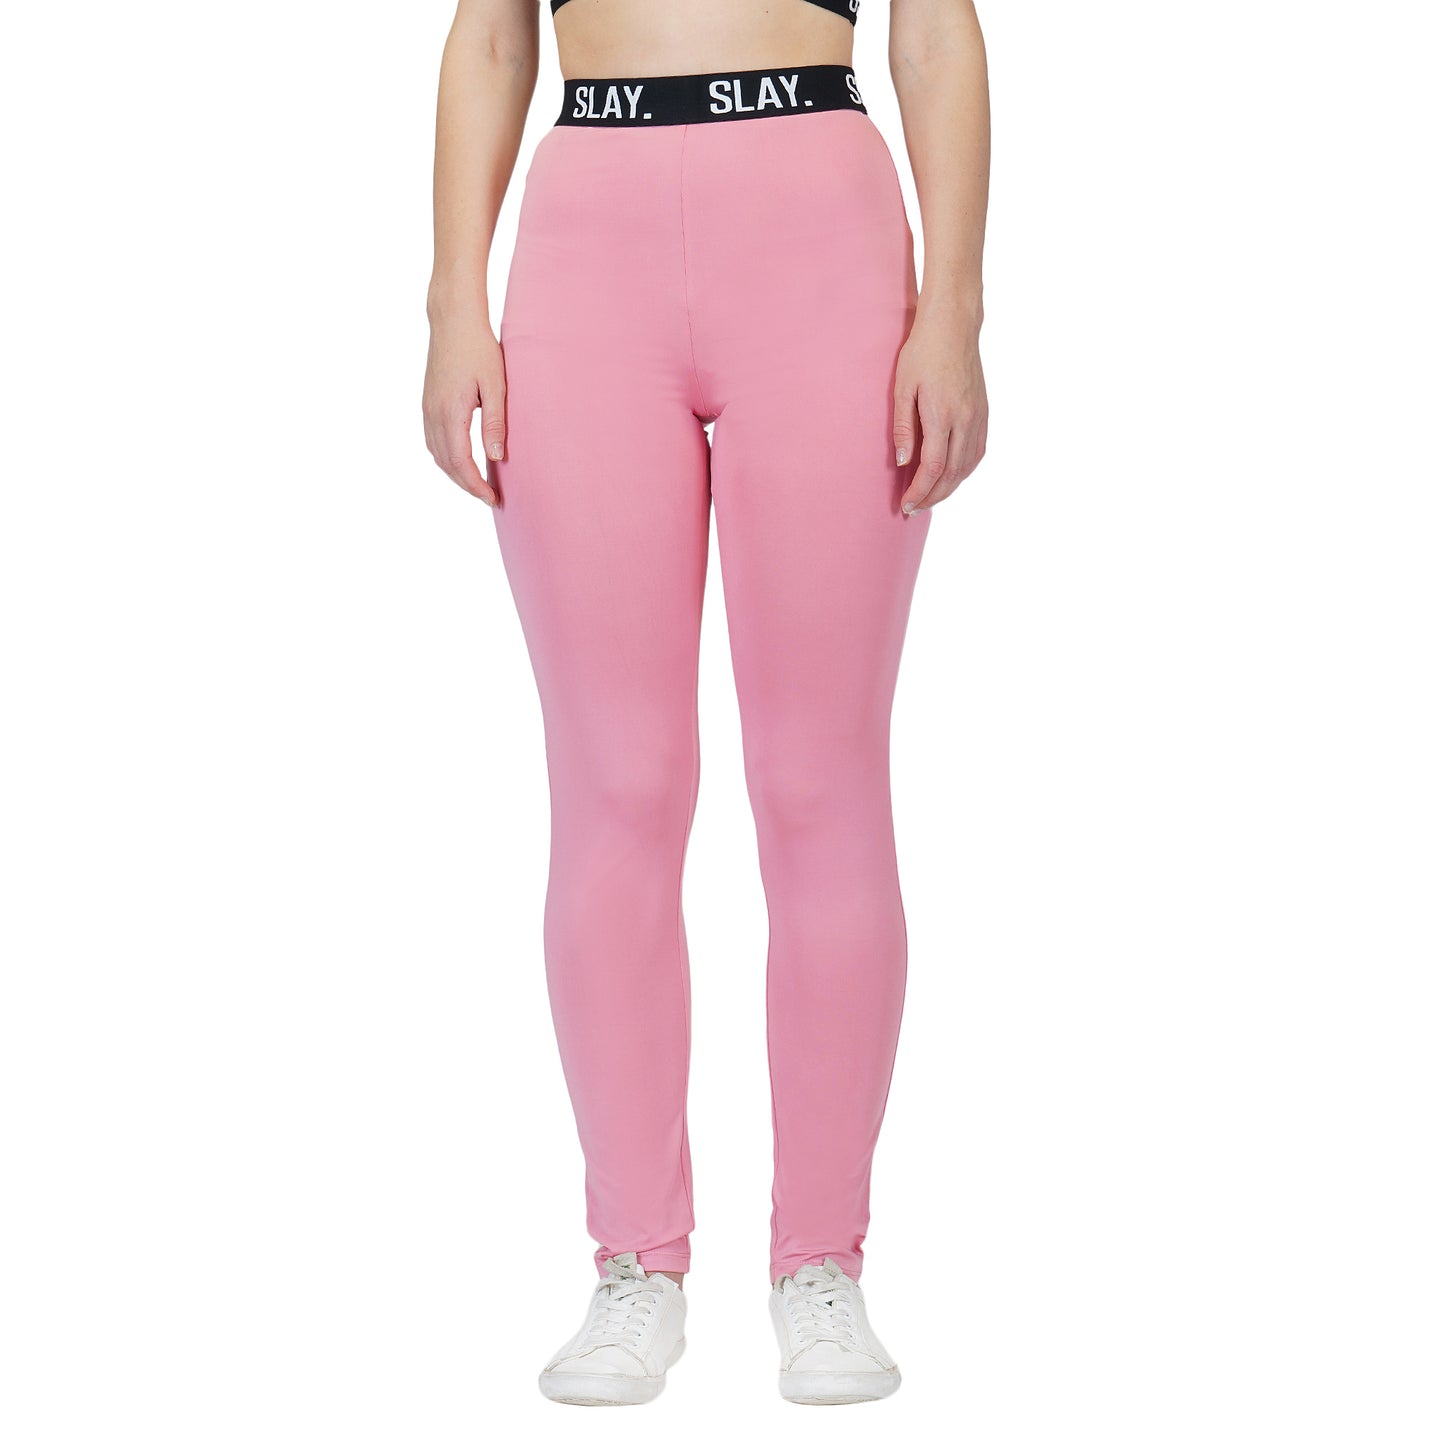 SLAY. Sport Women's Activewear Crop Top And Pants Co-ord Set Pink